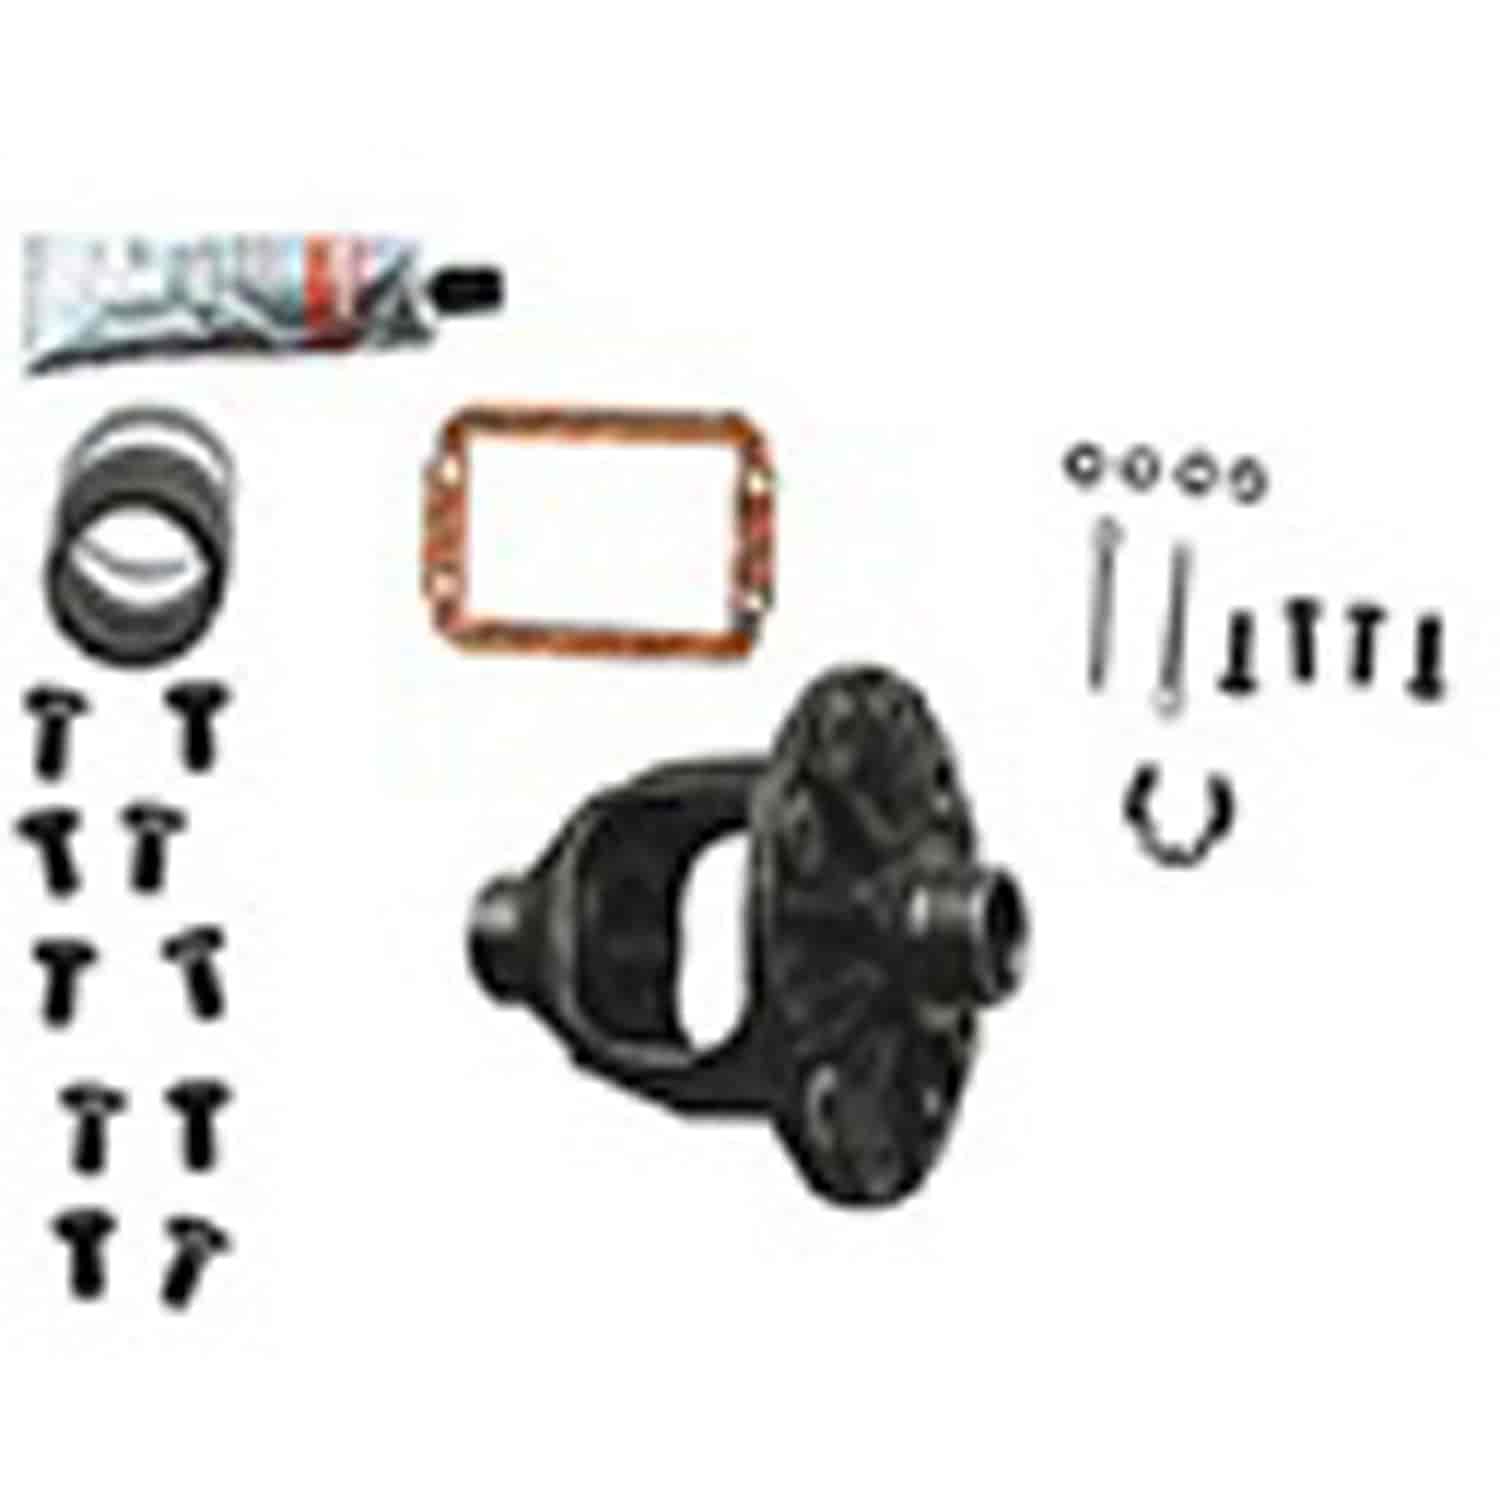 This Dana 30 differential carrier kit from Omix-ADA fits 1999 Jeep Cherokee XJ and 99-06 TJ Wrangler